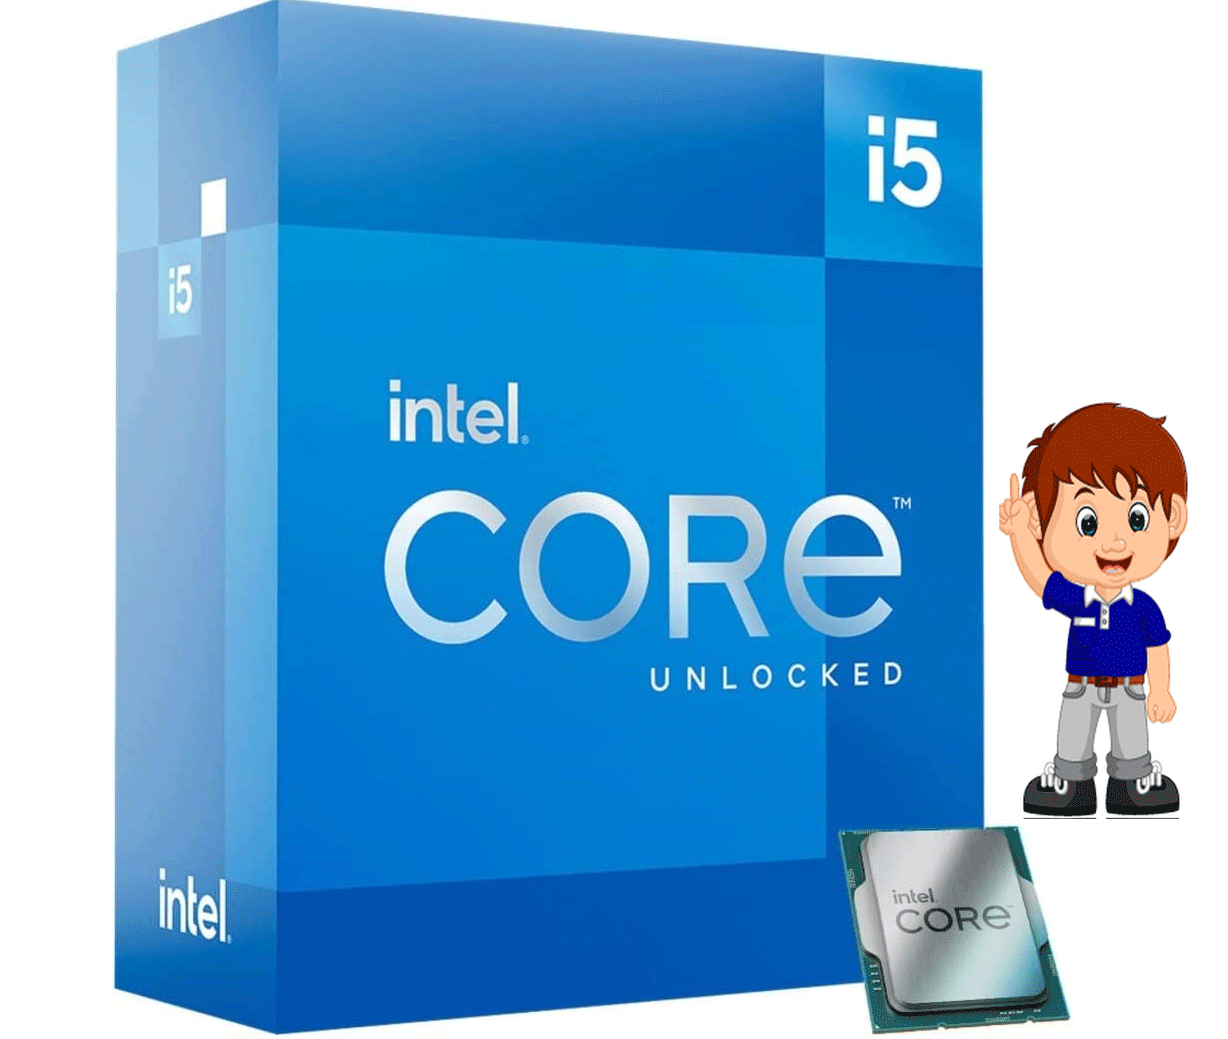 Intel Core i5-13500 Latest Review